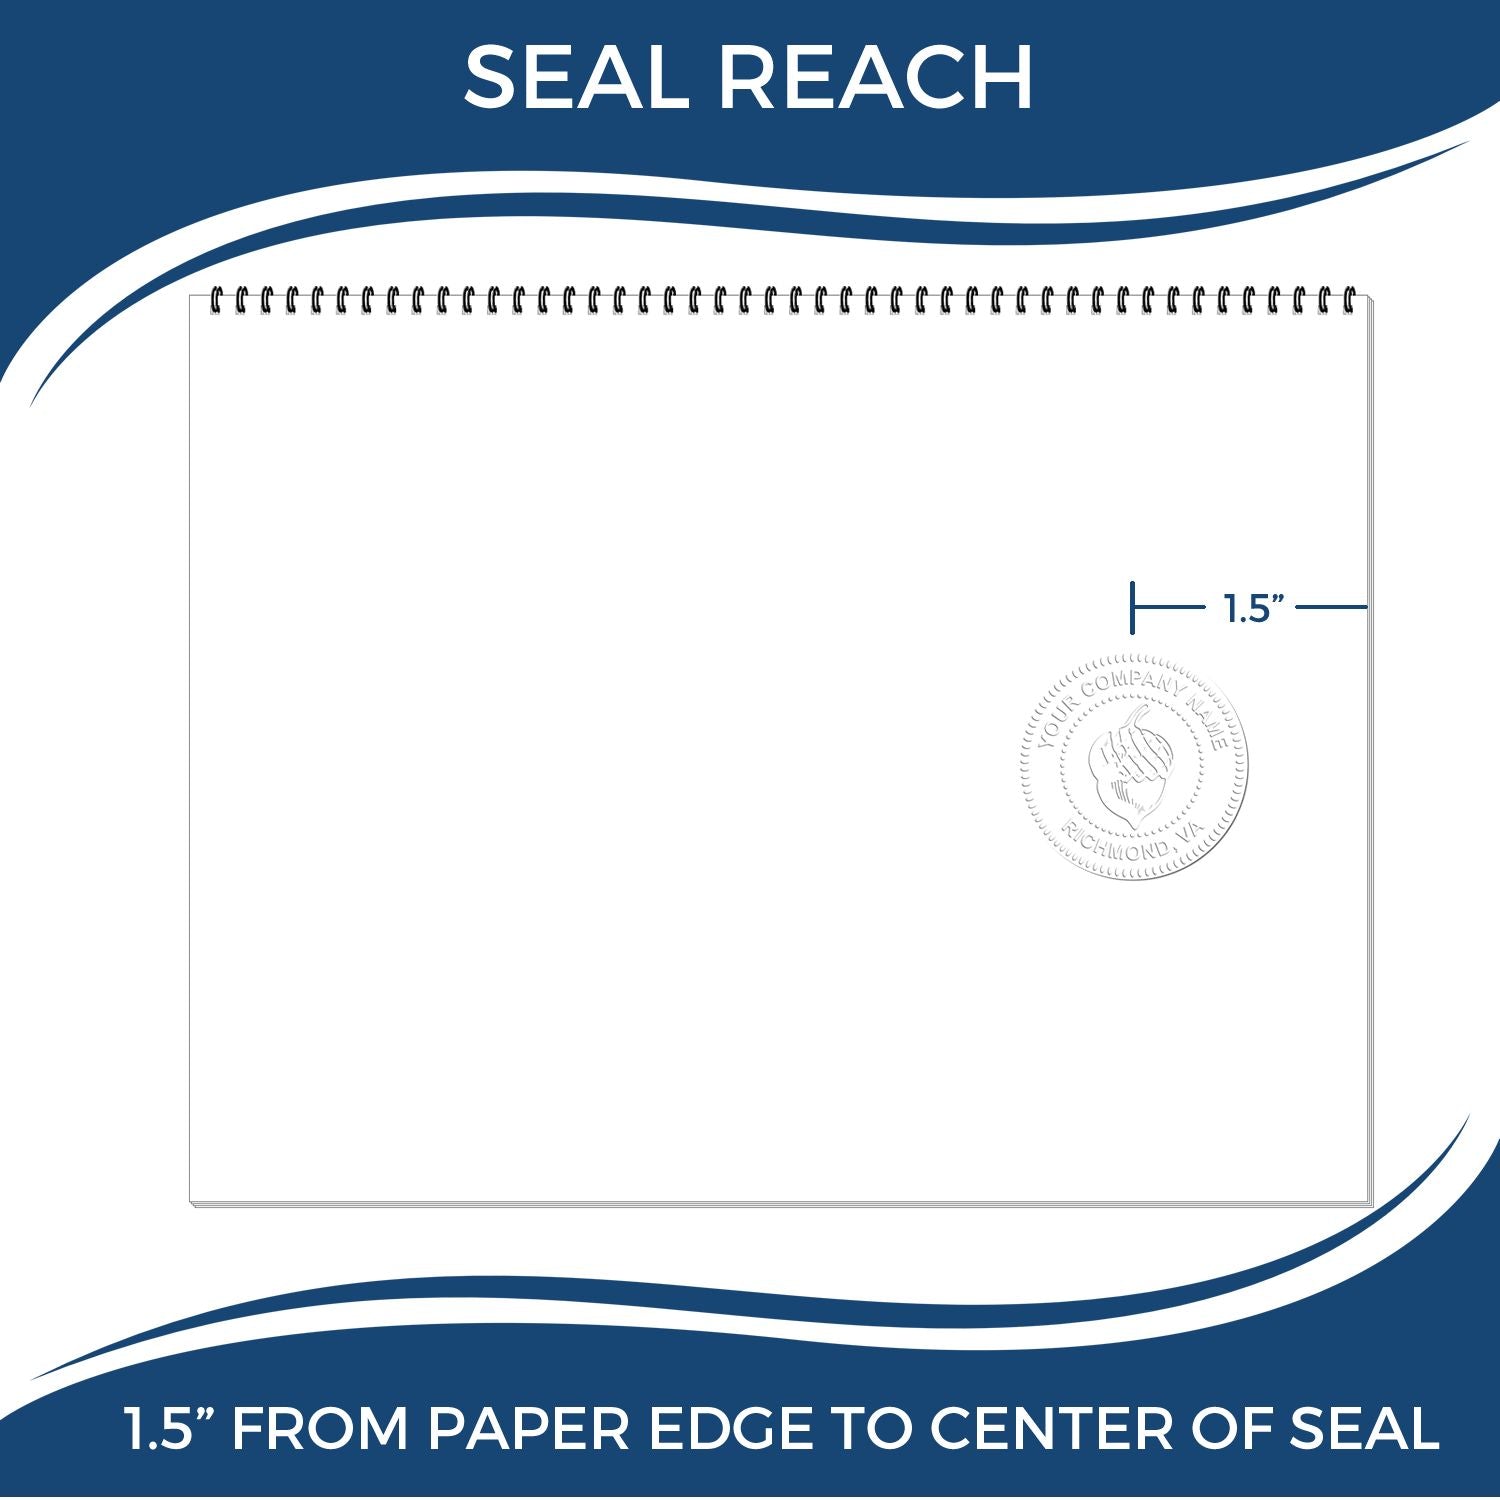 An infographic showing the seal reach which is represented by a ruler and a miniature seal image of the Iowa Engineer Desk Seal